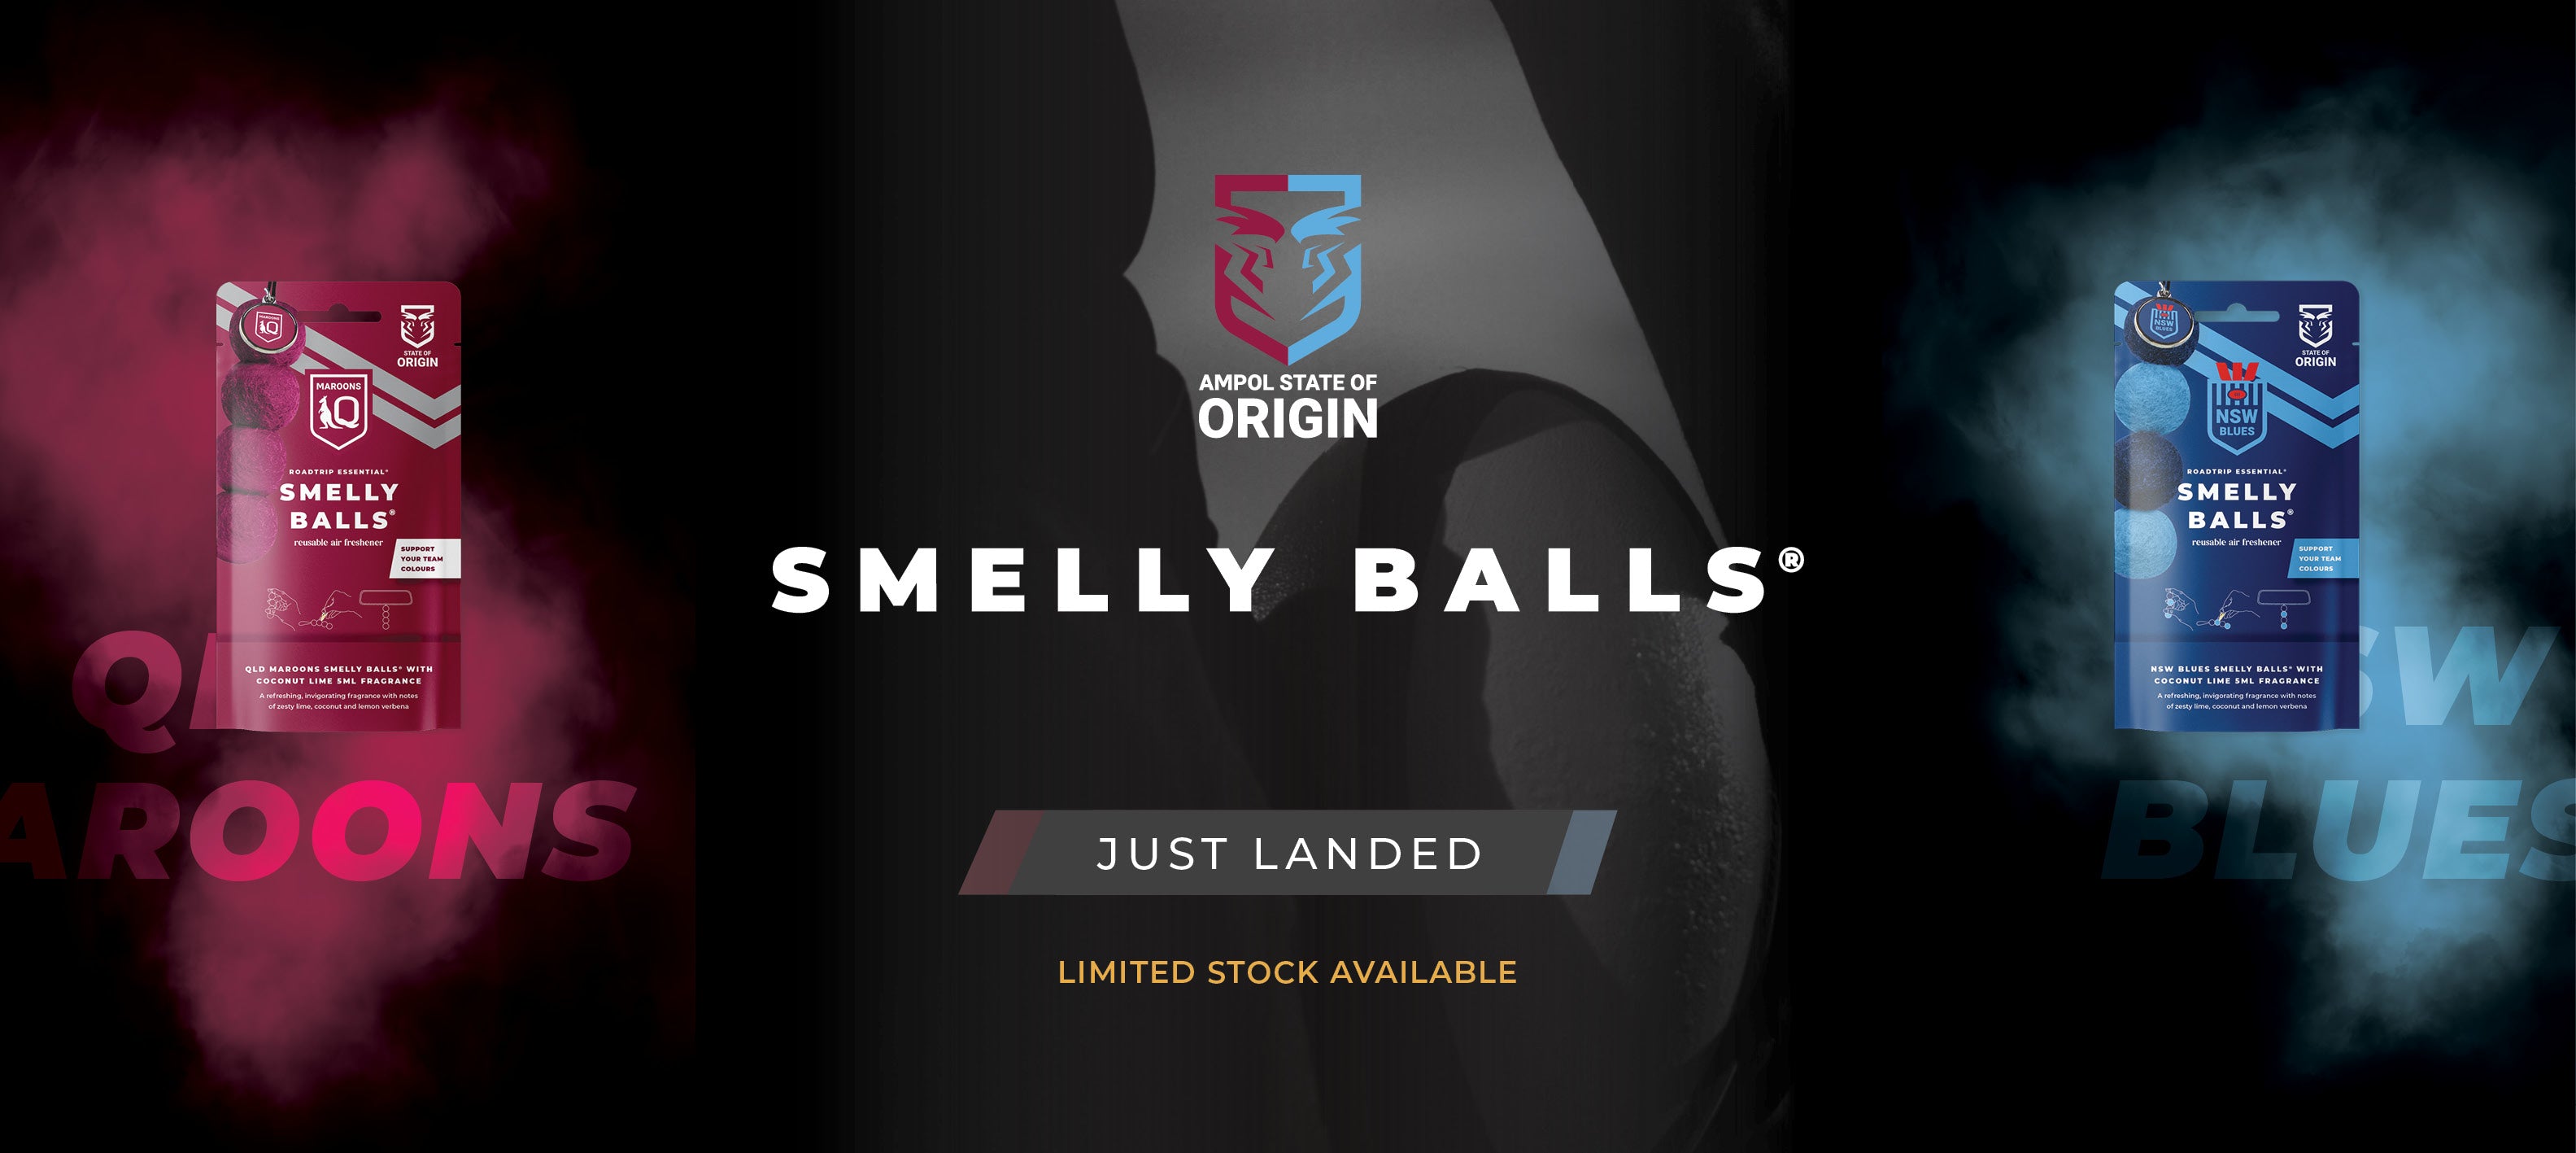 Smelly Balls NRL State of Origin Launch